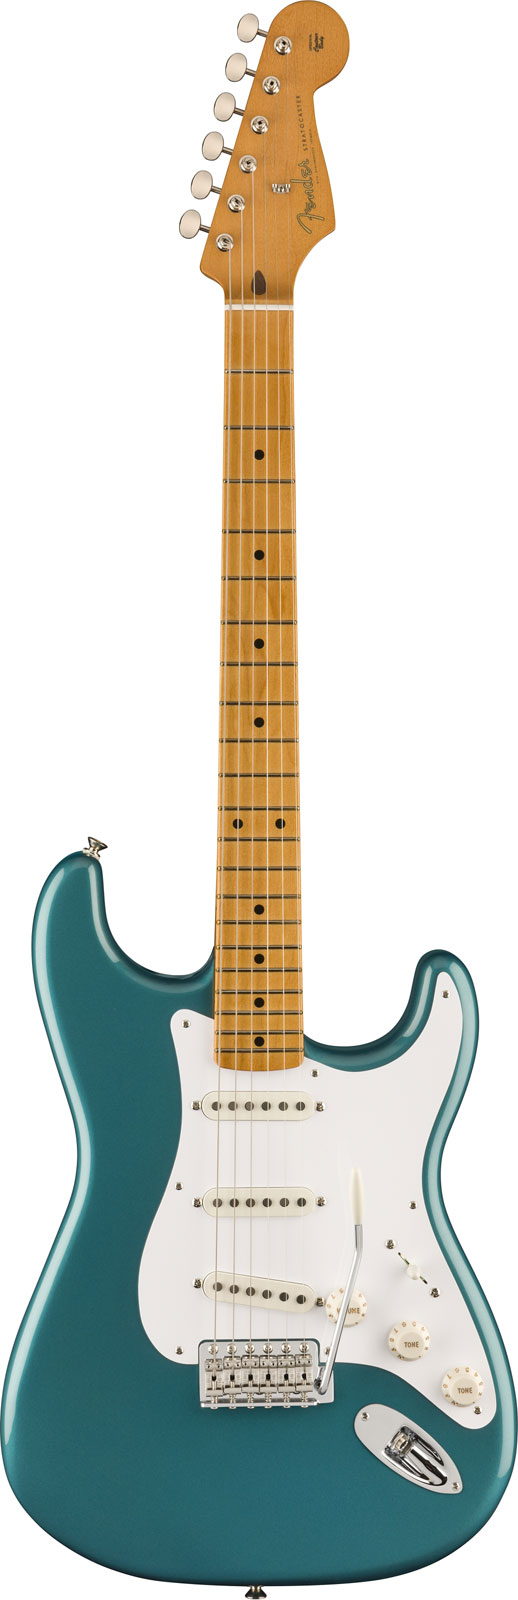 FENDER MEXICAN VINTERA II 50S STRATOCASTER MN OCEAN TURQUOISE